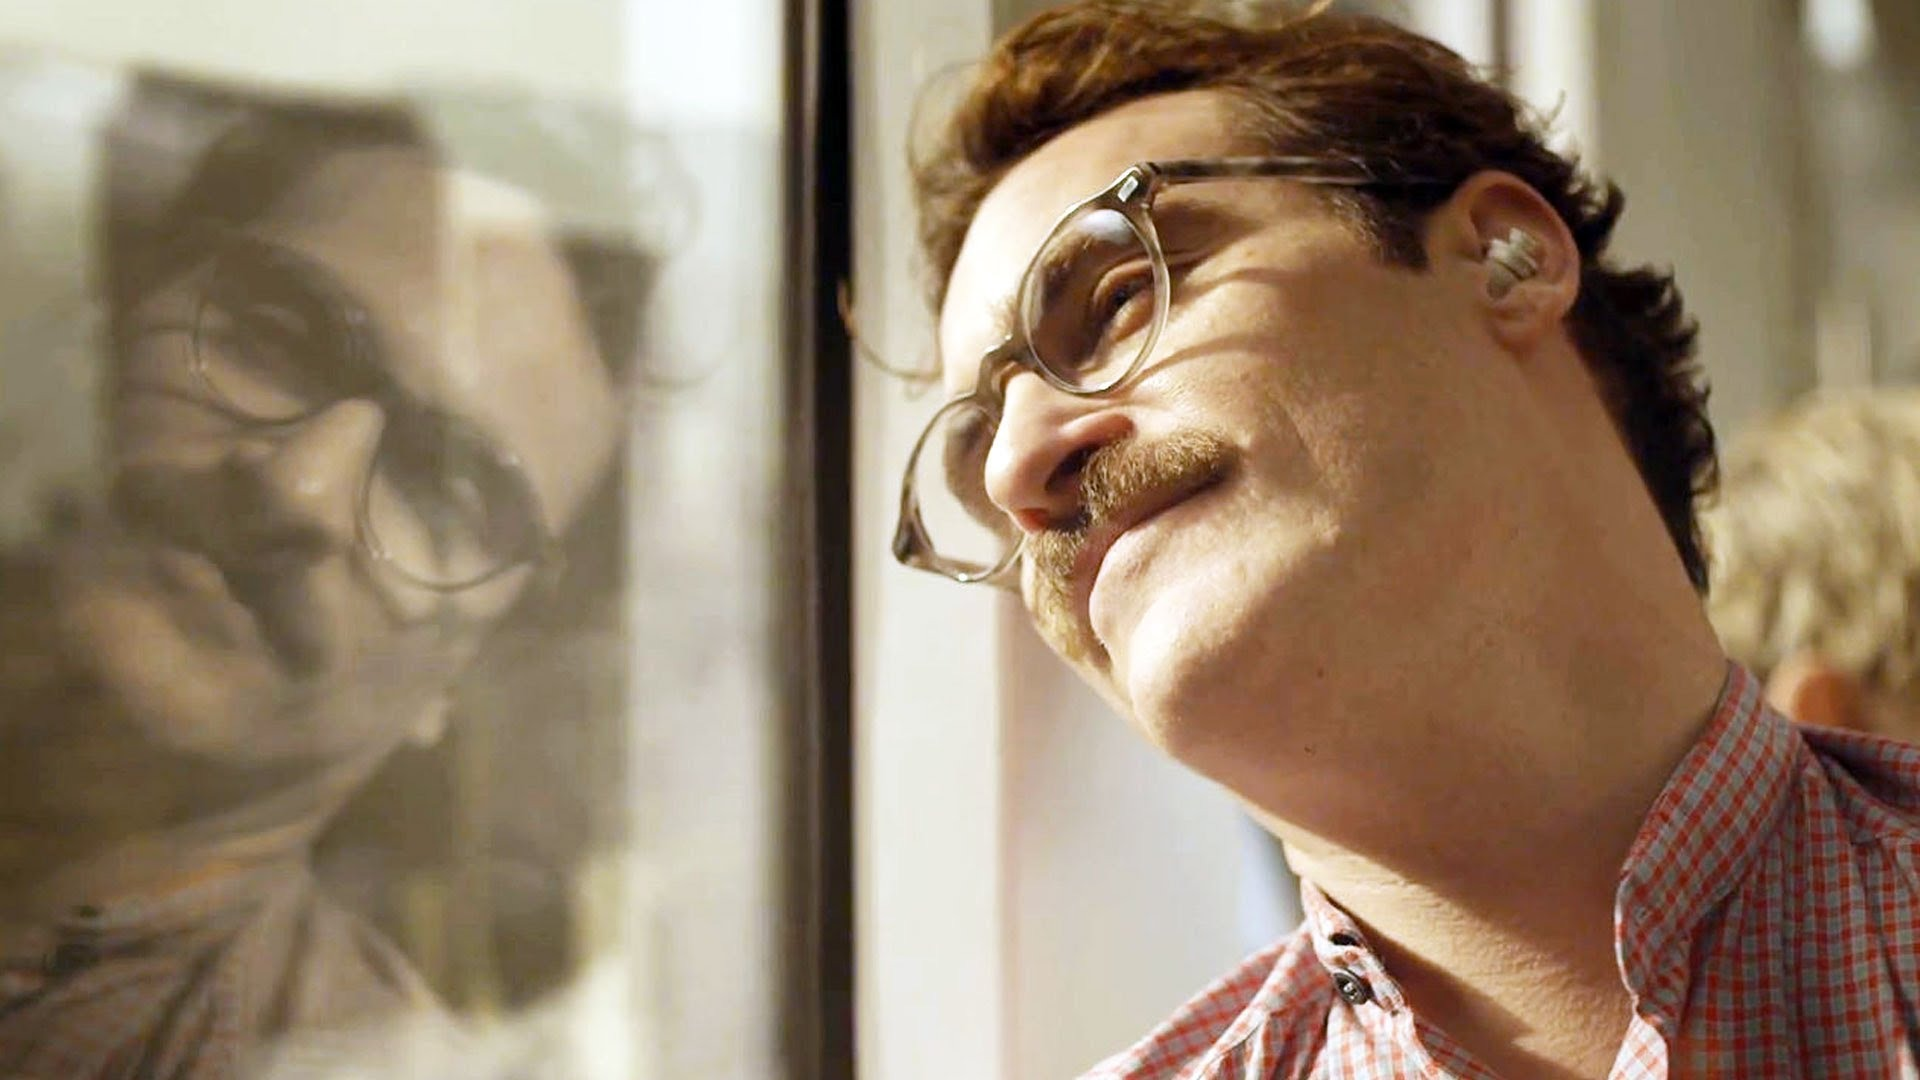 Film still from 'Her'. A man smiles out a train window with the sun shining on his face.